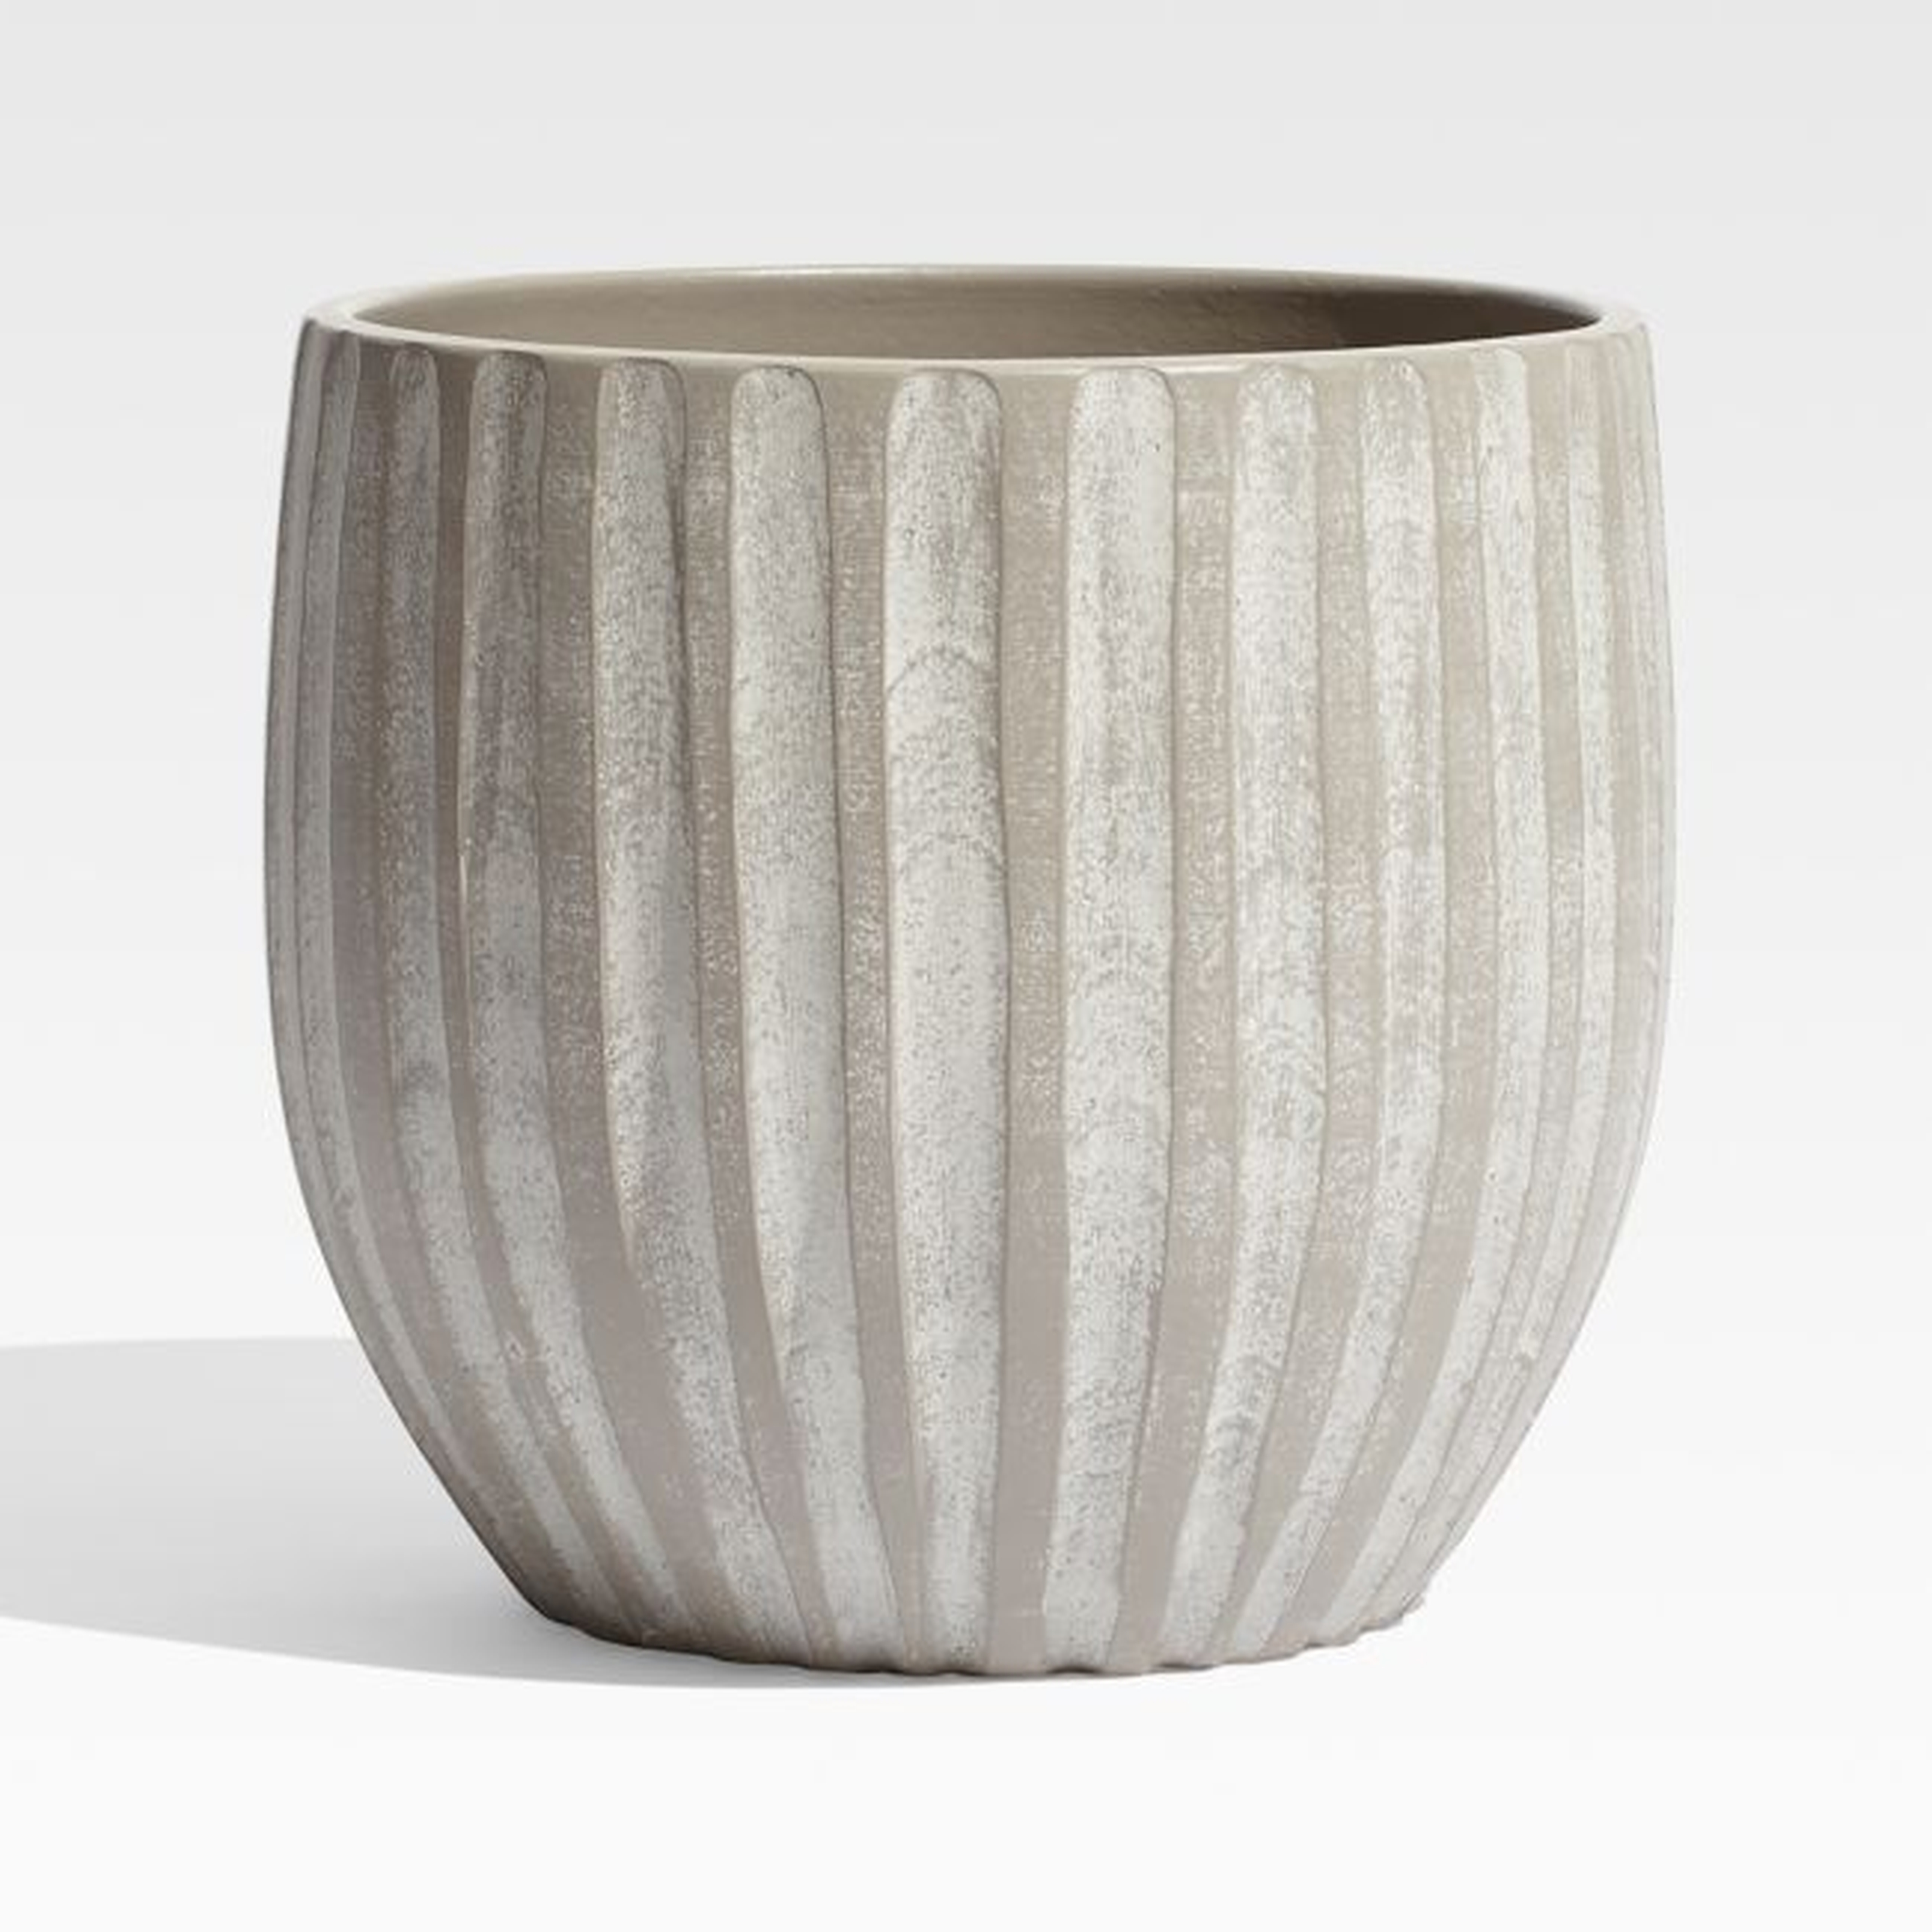 Mae Tall Cement Planter - Crate and Barrel